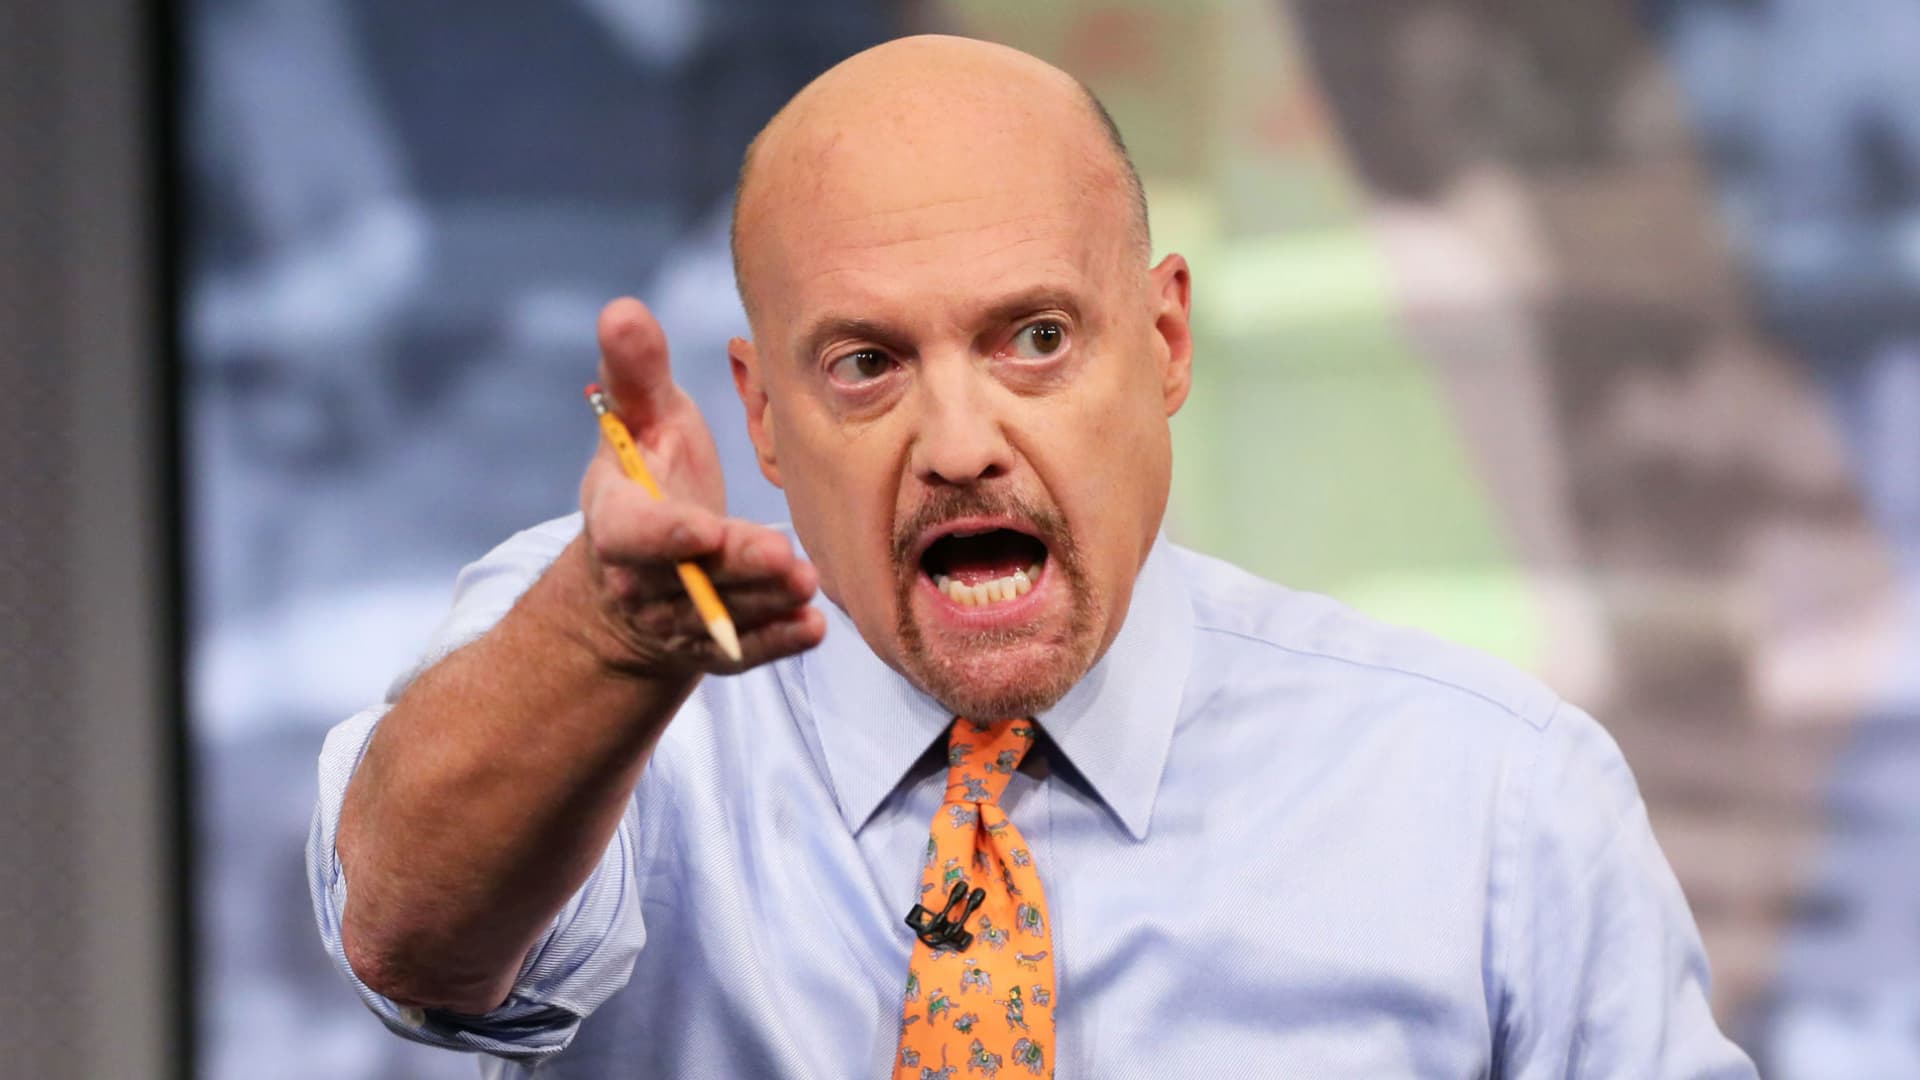 Position your portfolio for a Fed win and avoid these three market mindsets, Jim Cramer says